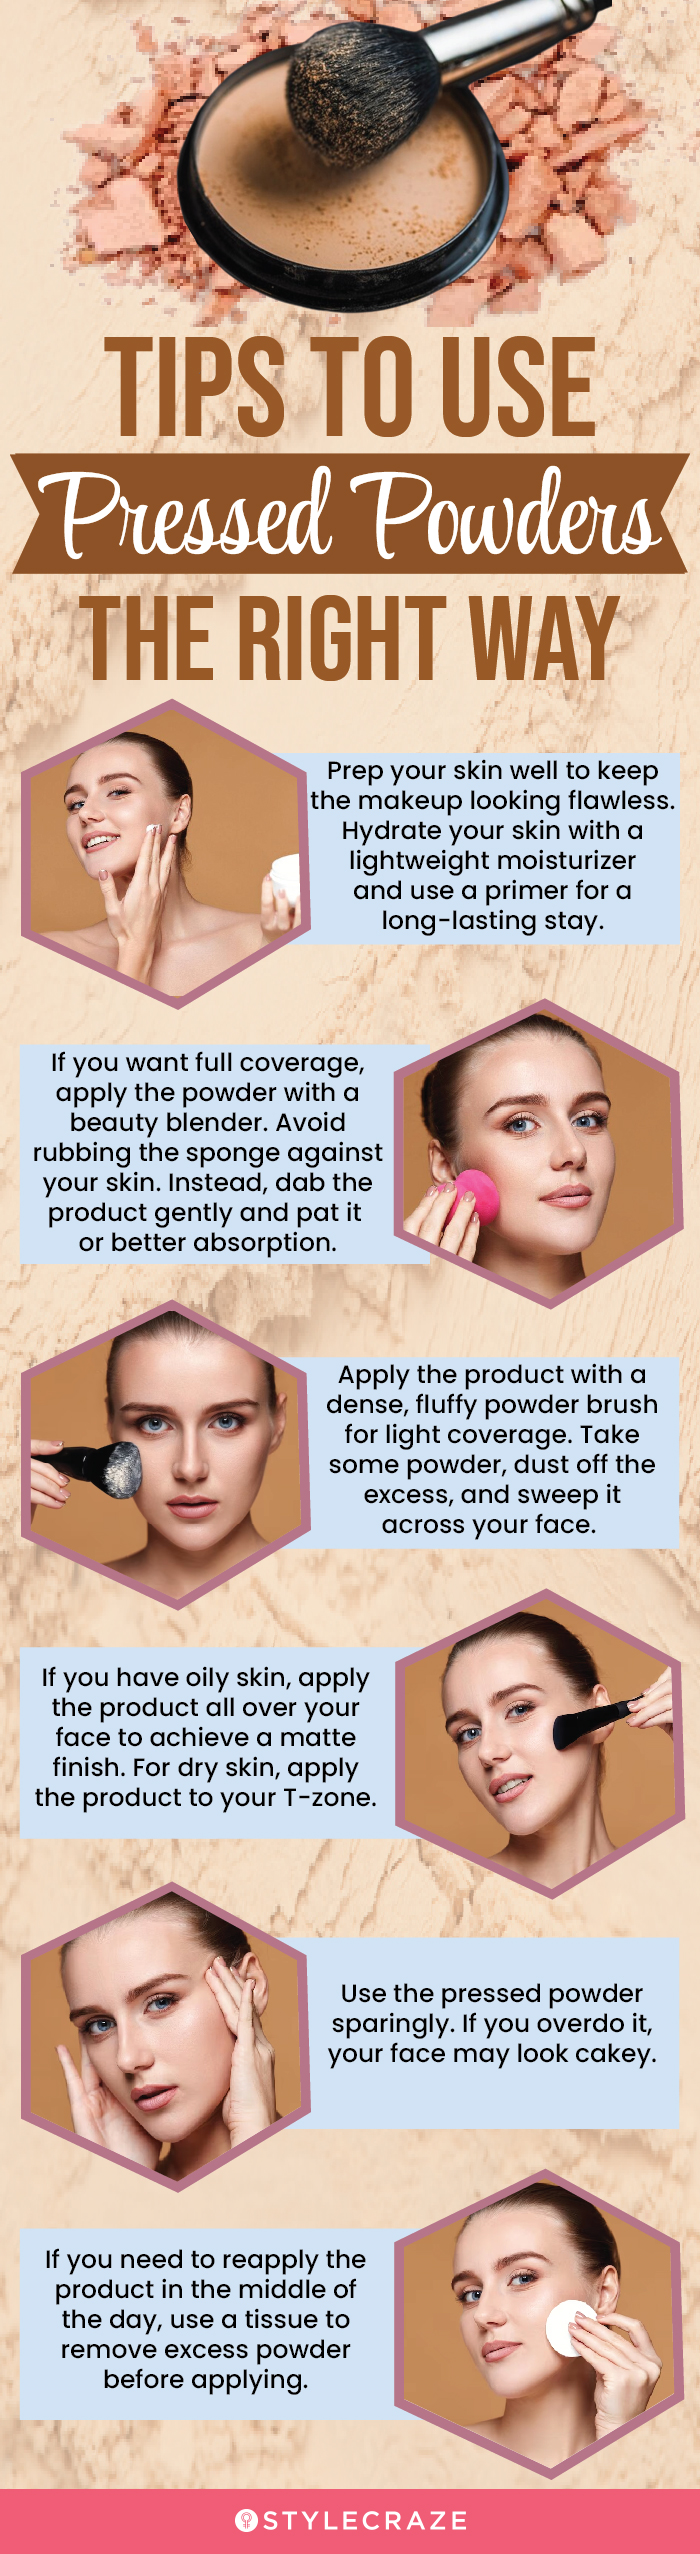 Tips To Use Pressed Powders The Right Way [infographic]